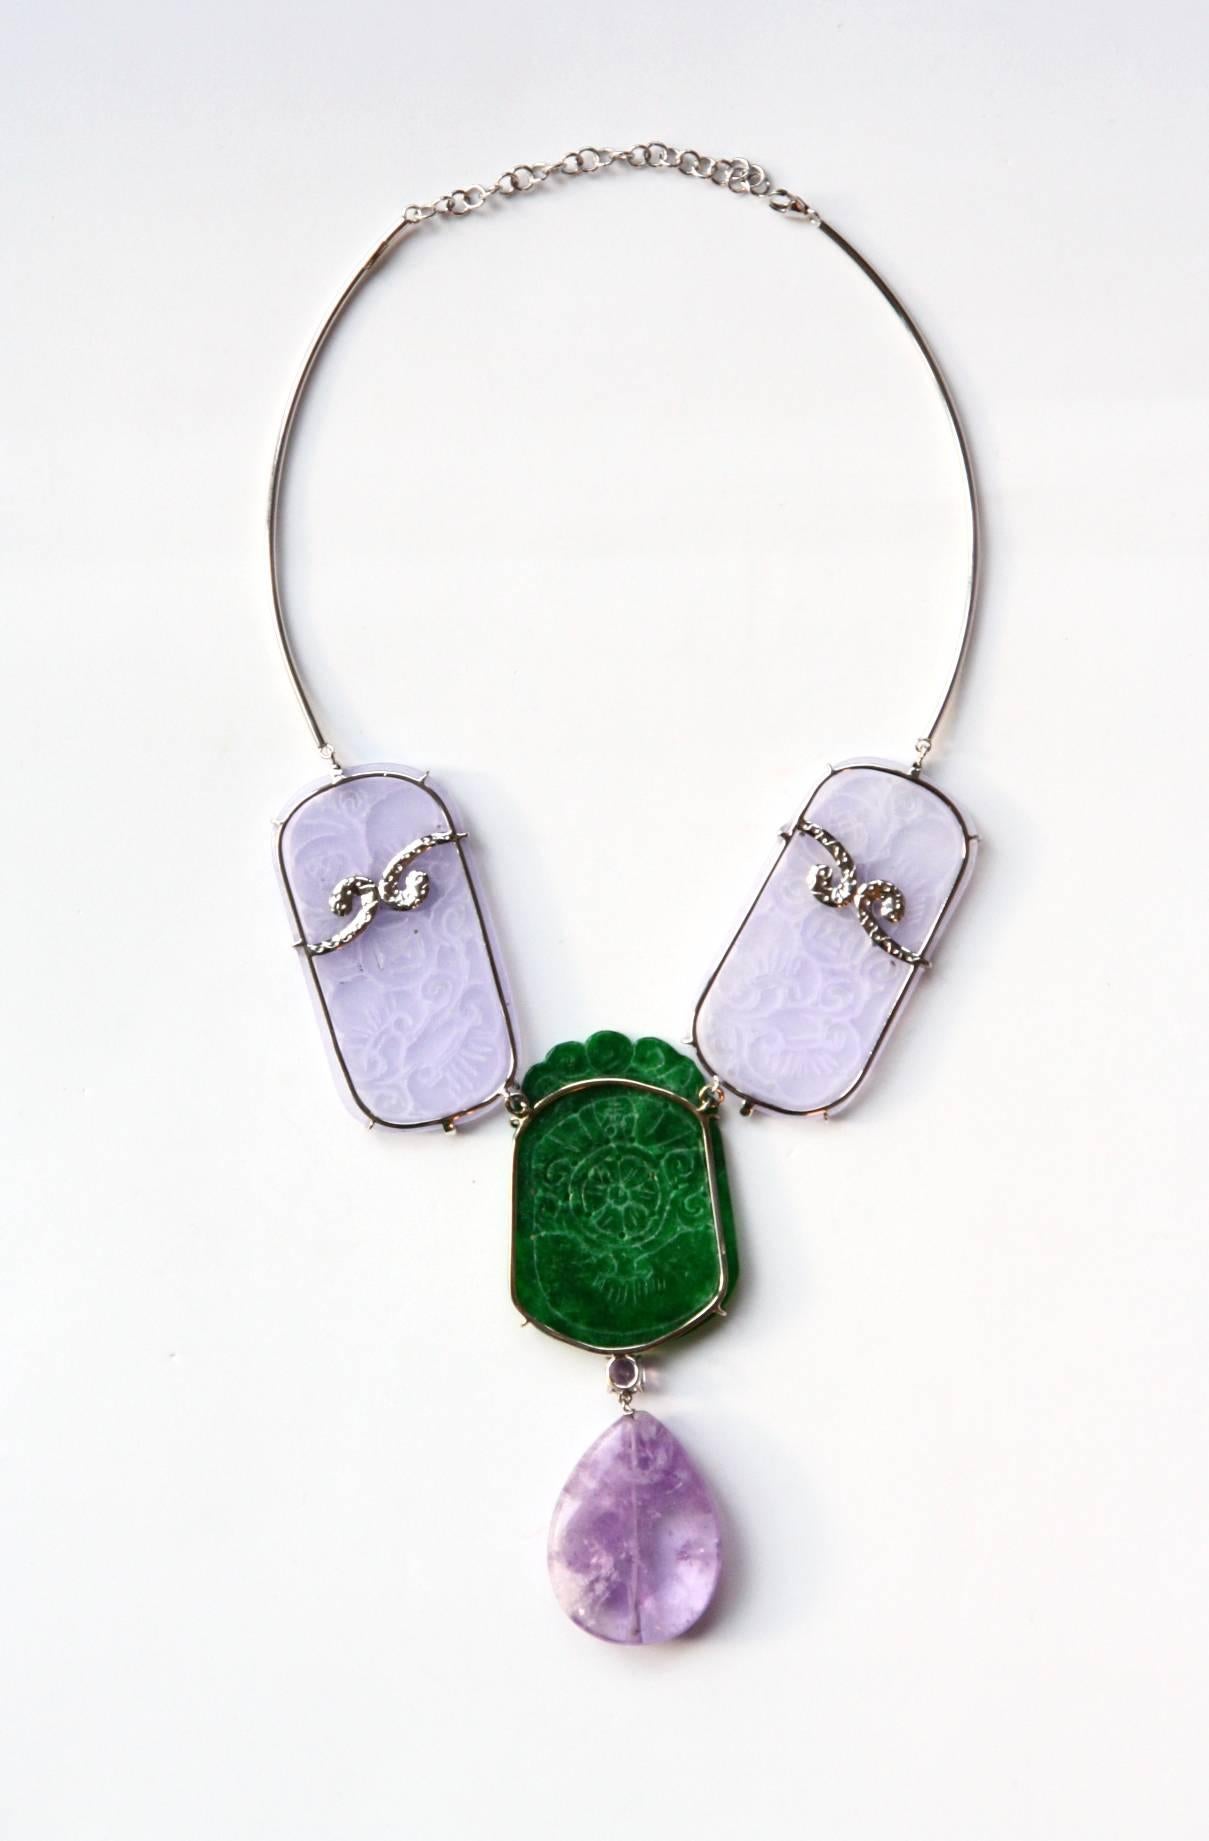 Very nice white gold 18k necklace gr. 26 with amazing lavender and spinach jade plaques, amethyst and amethyst drop. Adjustable one.
All Giulia Colussi jewelry is new and has never been previously owned or worn. Each item will arrive at your door